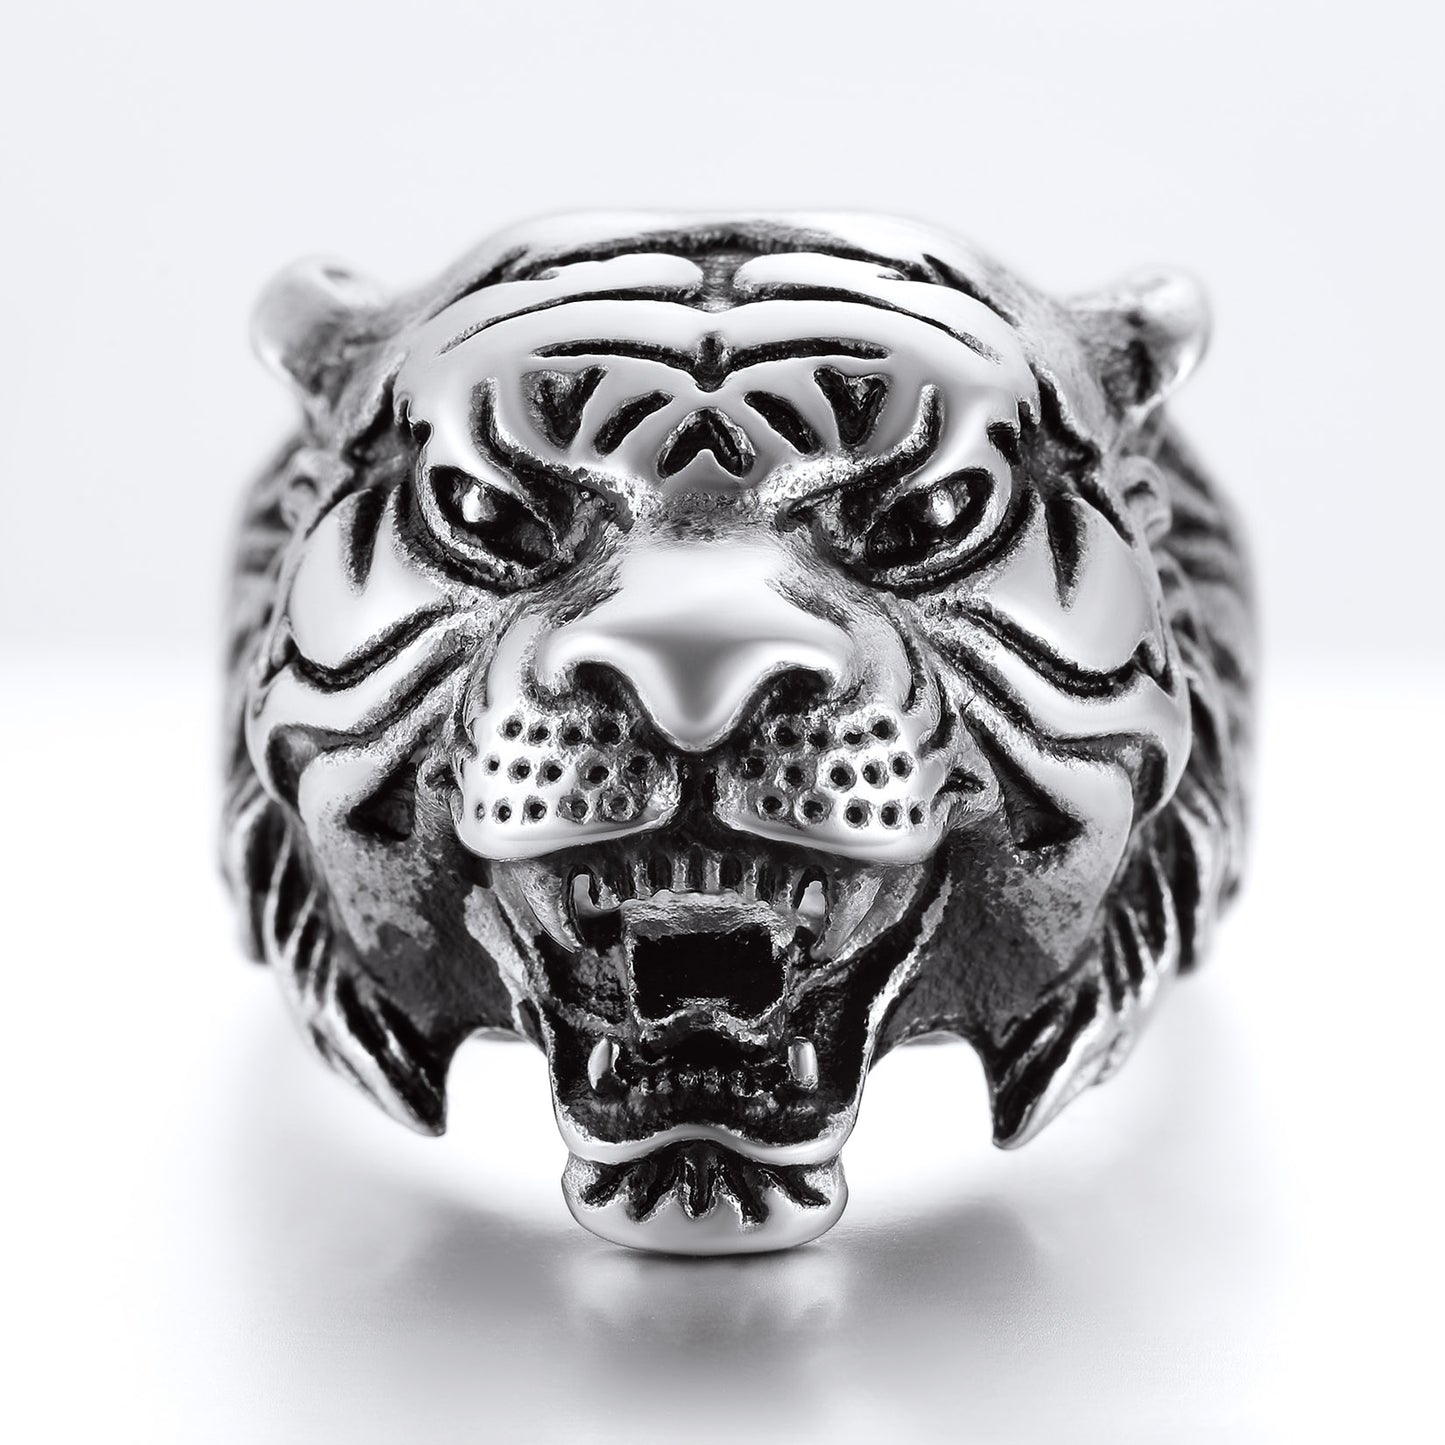 ChainsPro Stainless Steel Ring Men Rapper Tiger Rings Costume Jewelry